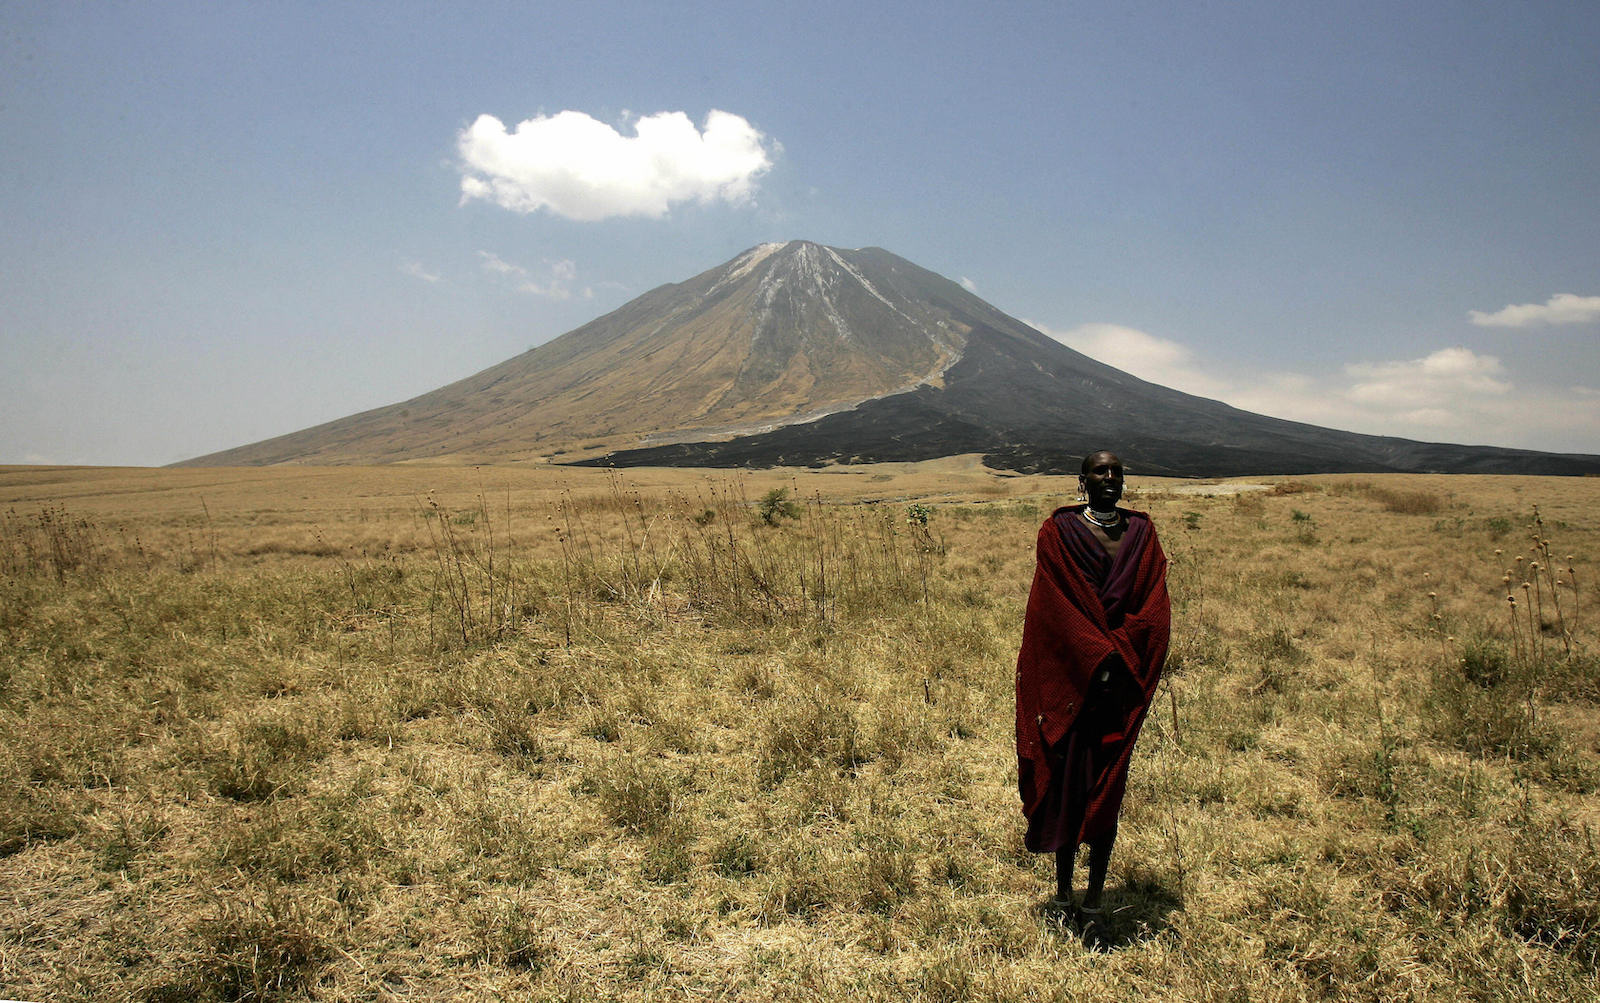 Maasai person stands on a grassy plain in front of a tall mountain